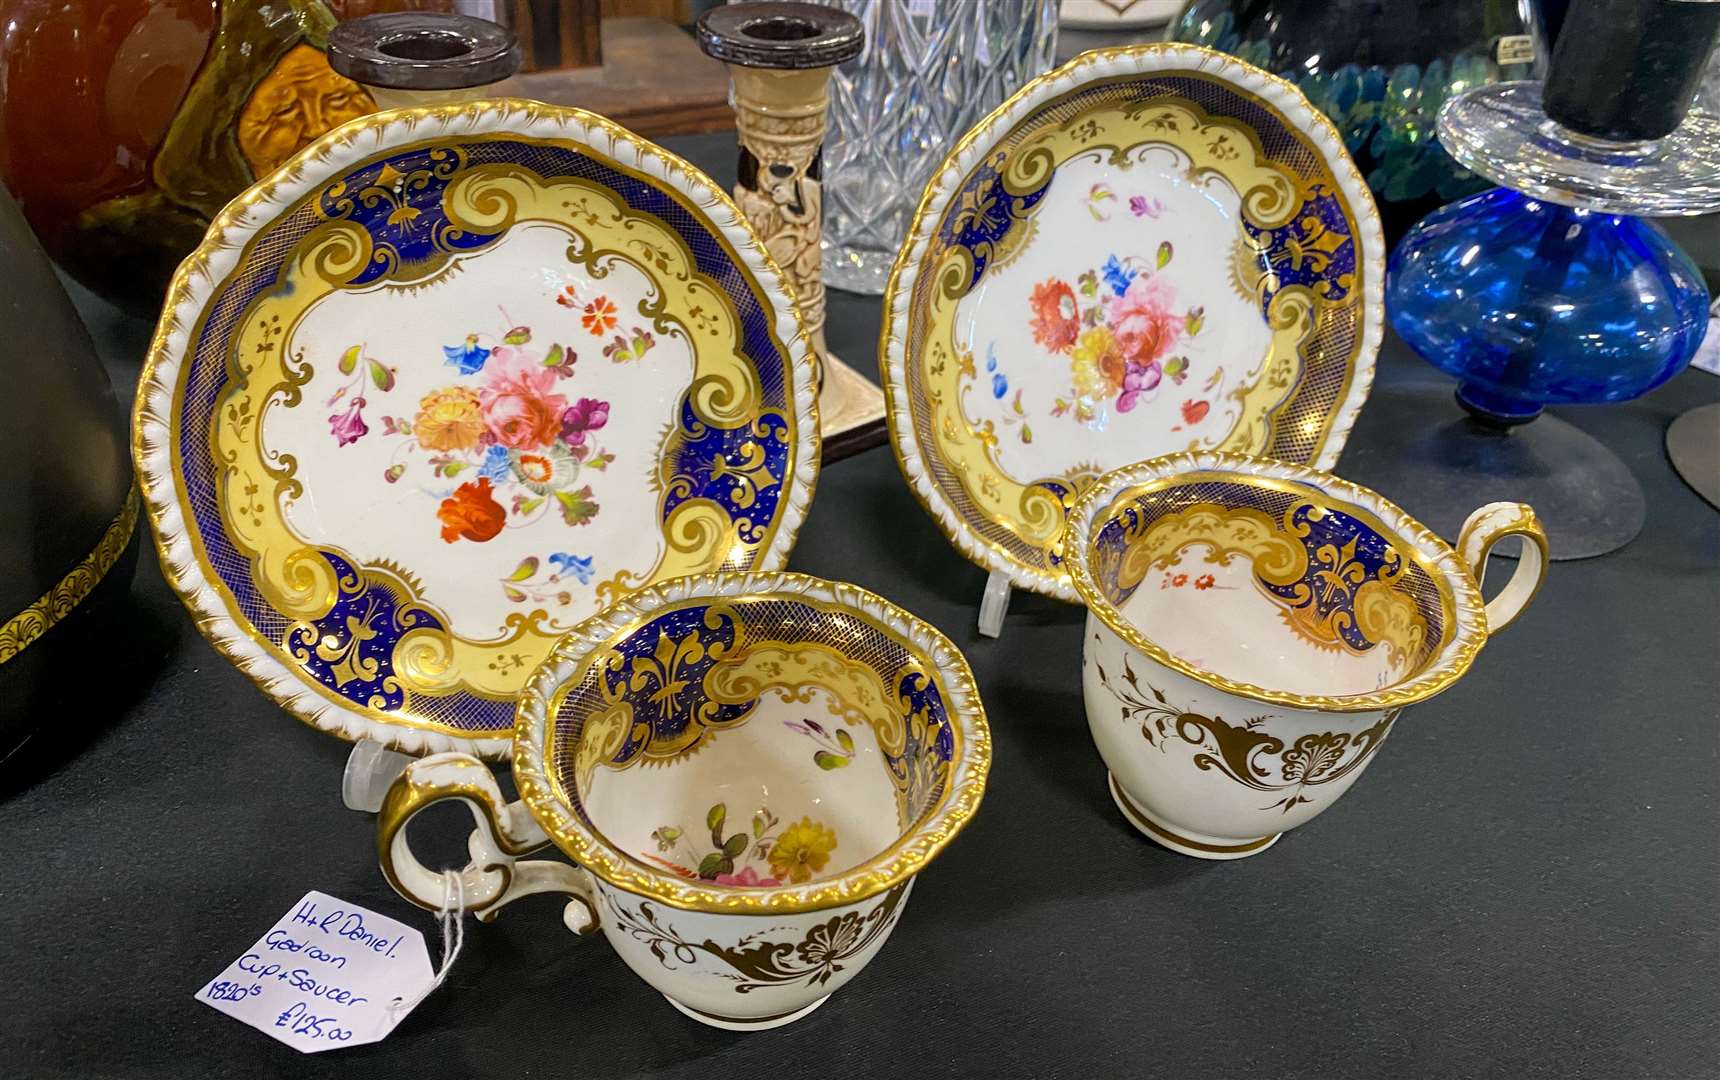 This porcelain teacup set dates back to the 1820s and was priced at £125